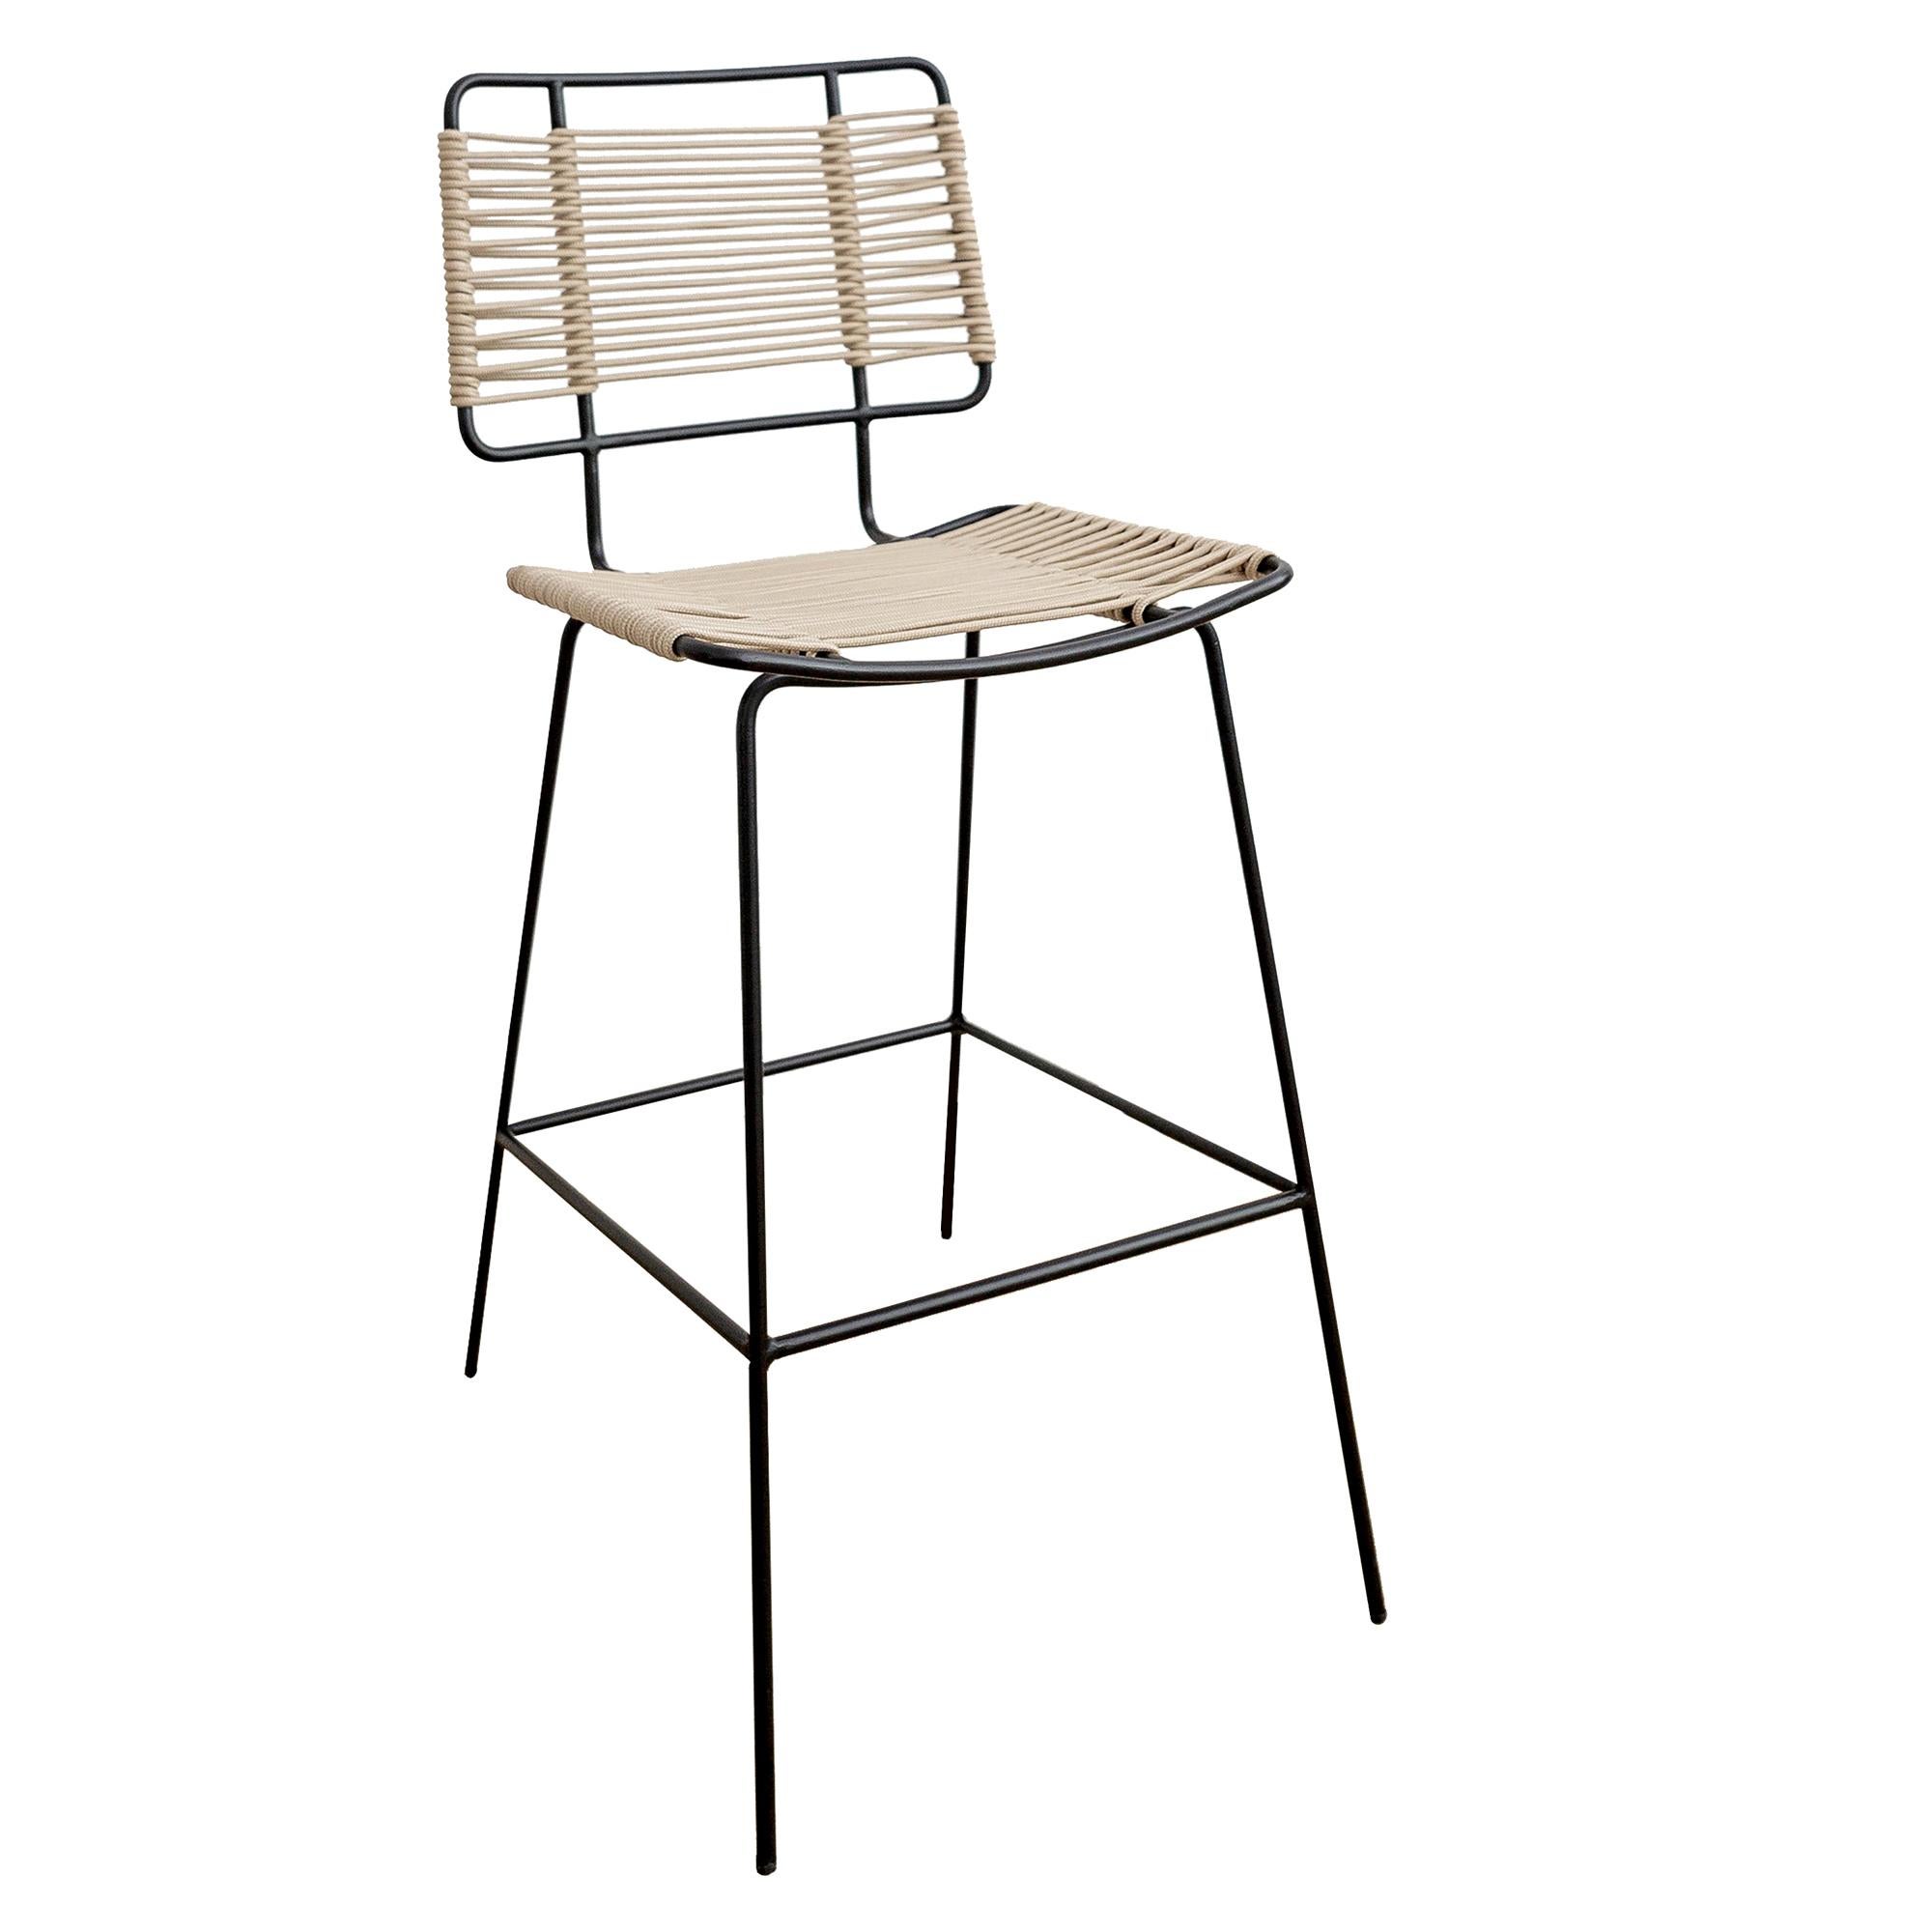 Arena Steel with Rope Weave Bar Stool